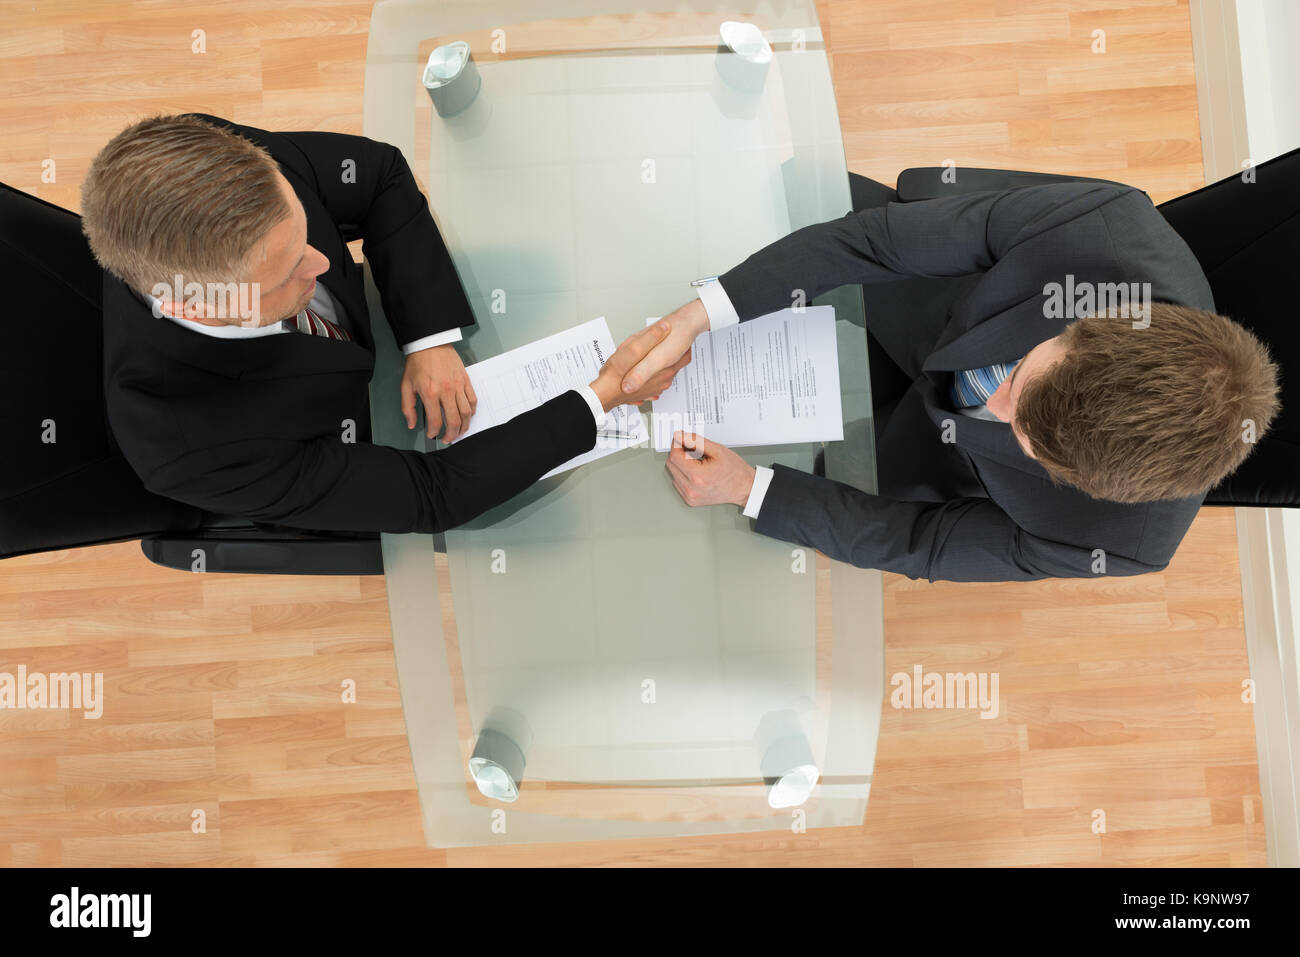 Elevated View Of Two Businessman Shaking Hands In The Office Stock Photo